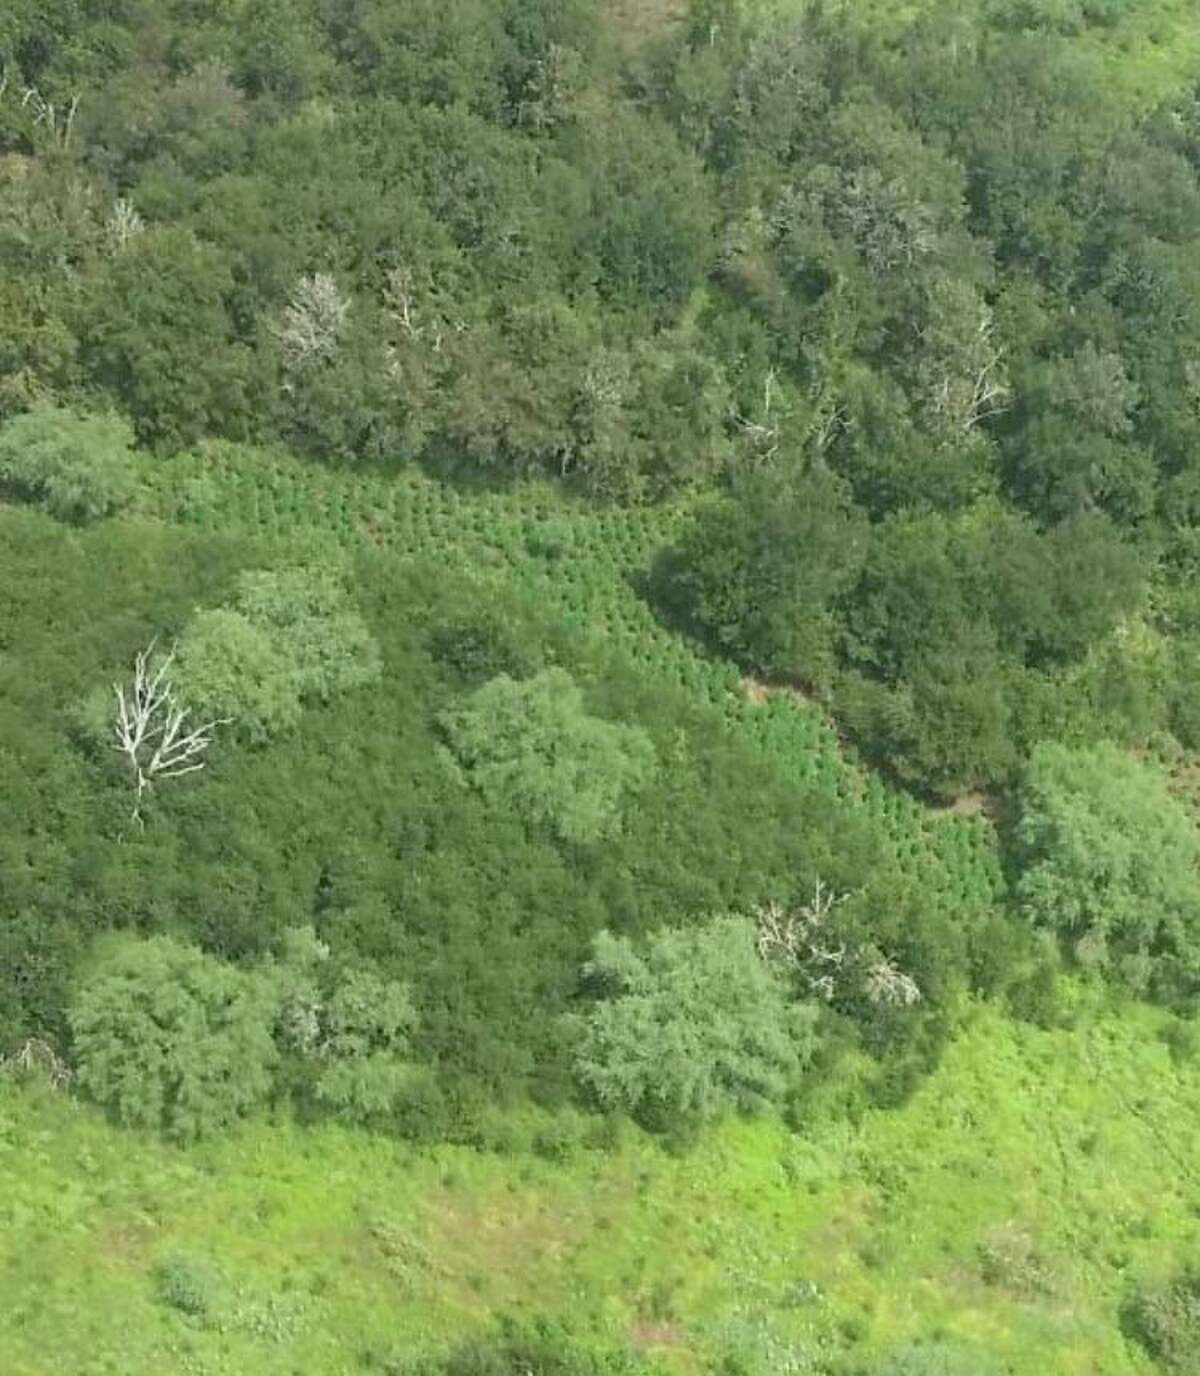 DEA and Austin County officials found and destroyed 8,653 marijuana plants and other items after a DEA helicopter discovered a pot farm Aug. 26 in Austin County.